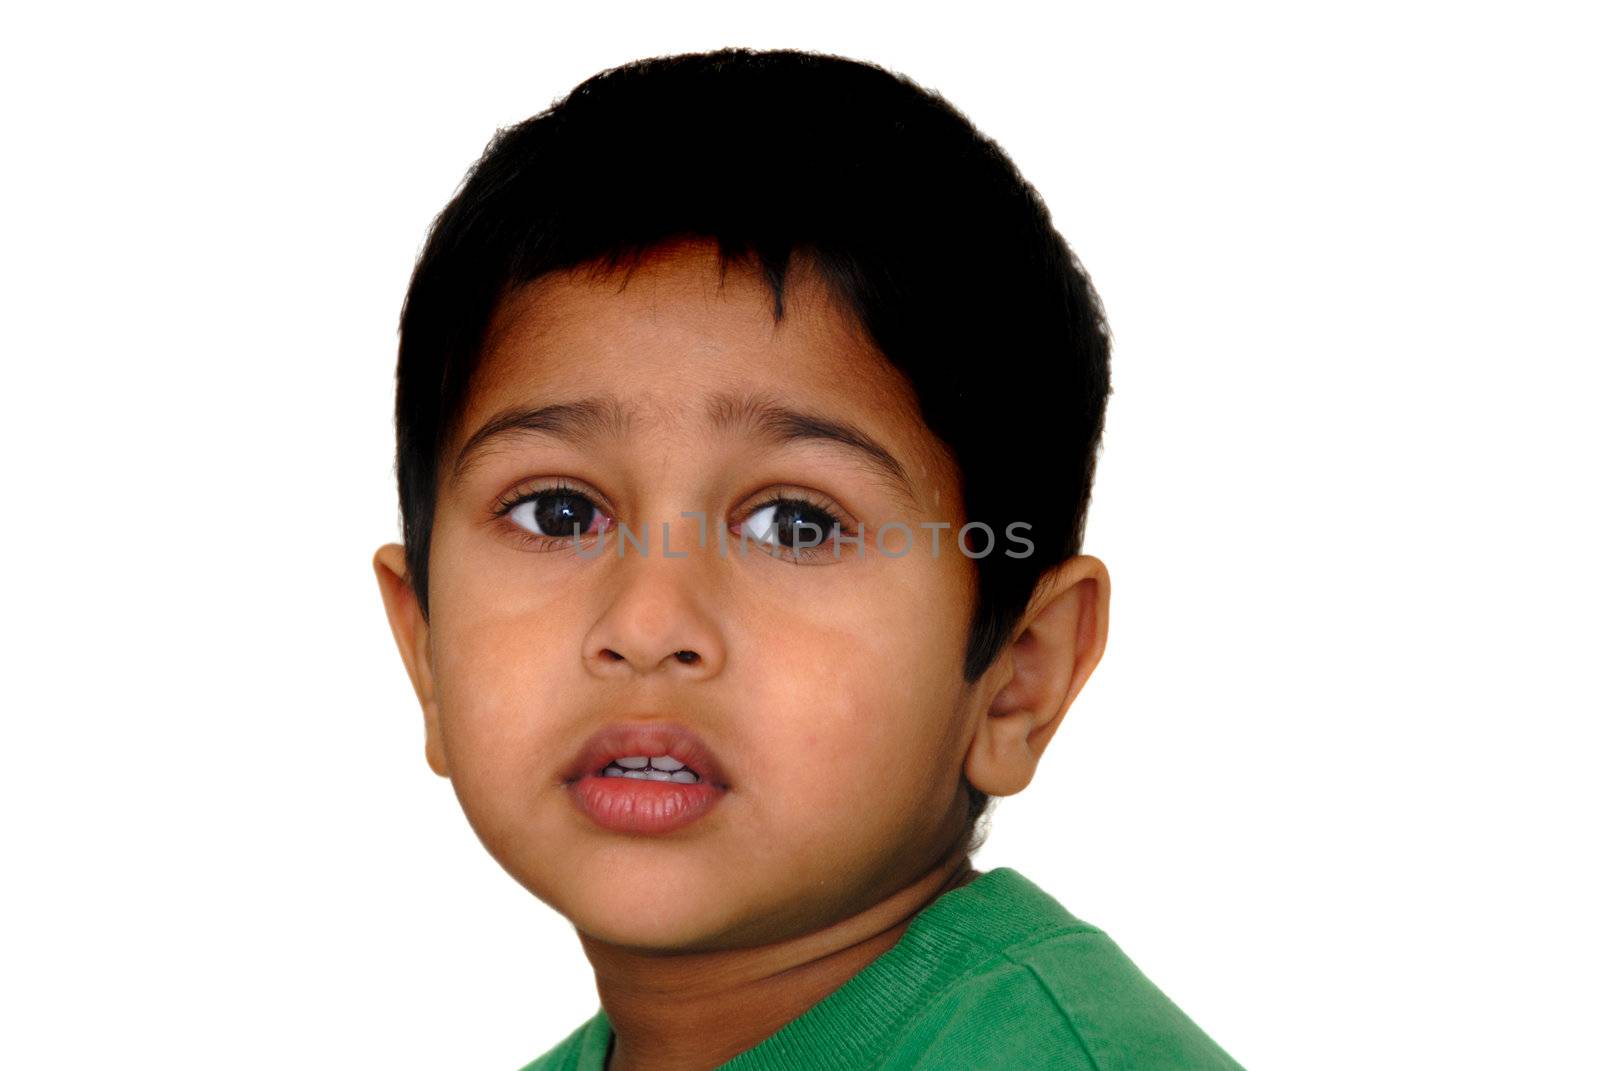 An handsome Indian kid looking very sad